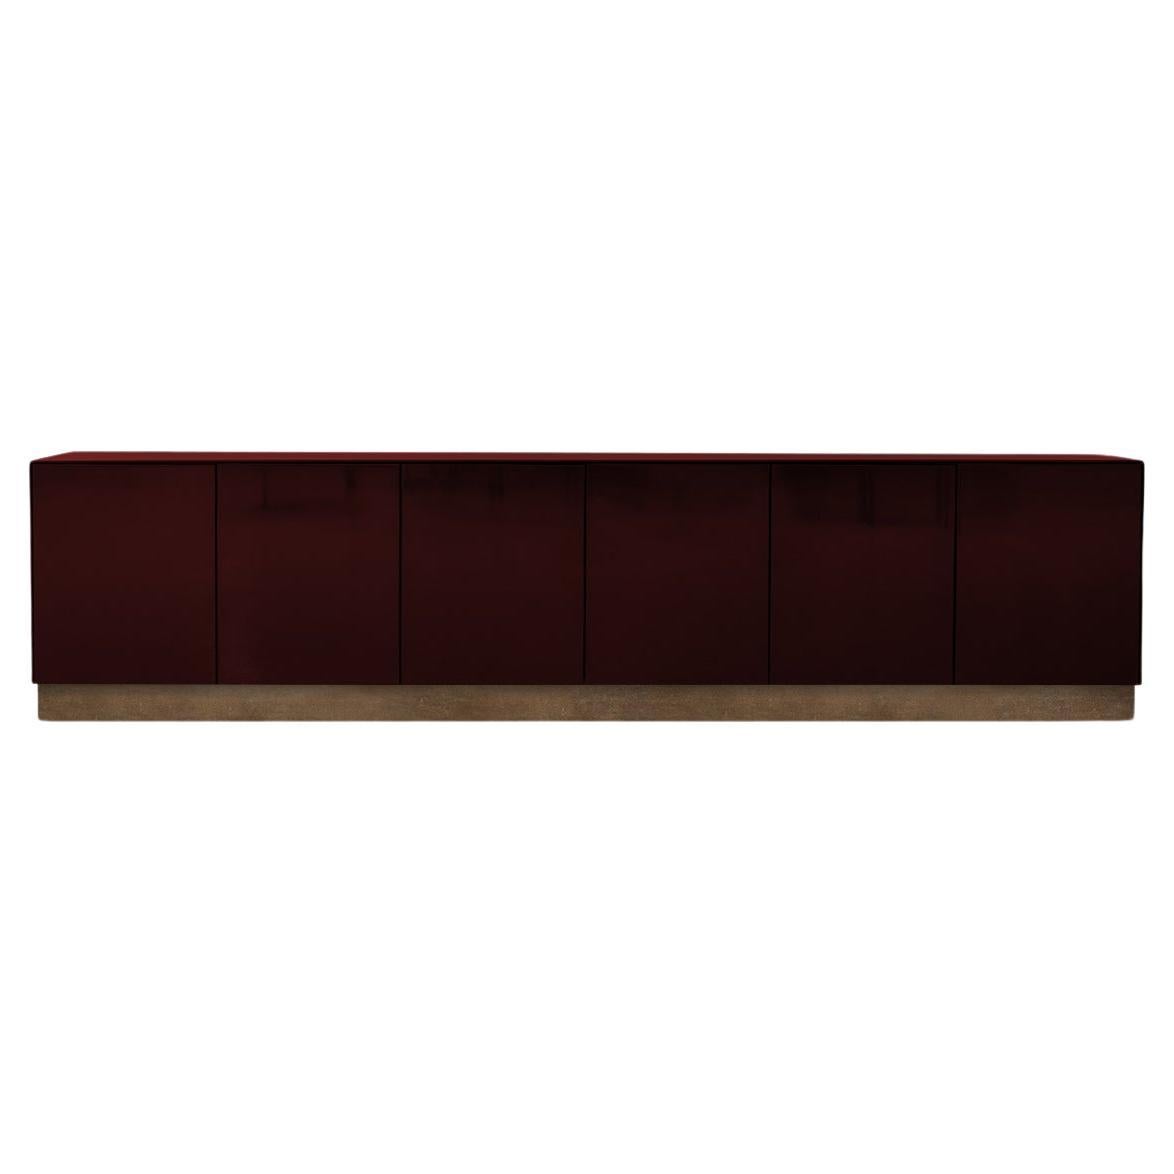 The Promenade Low Unit Lacquer 200cm/78.7" in Oxblood For Sale